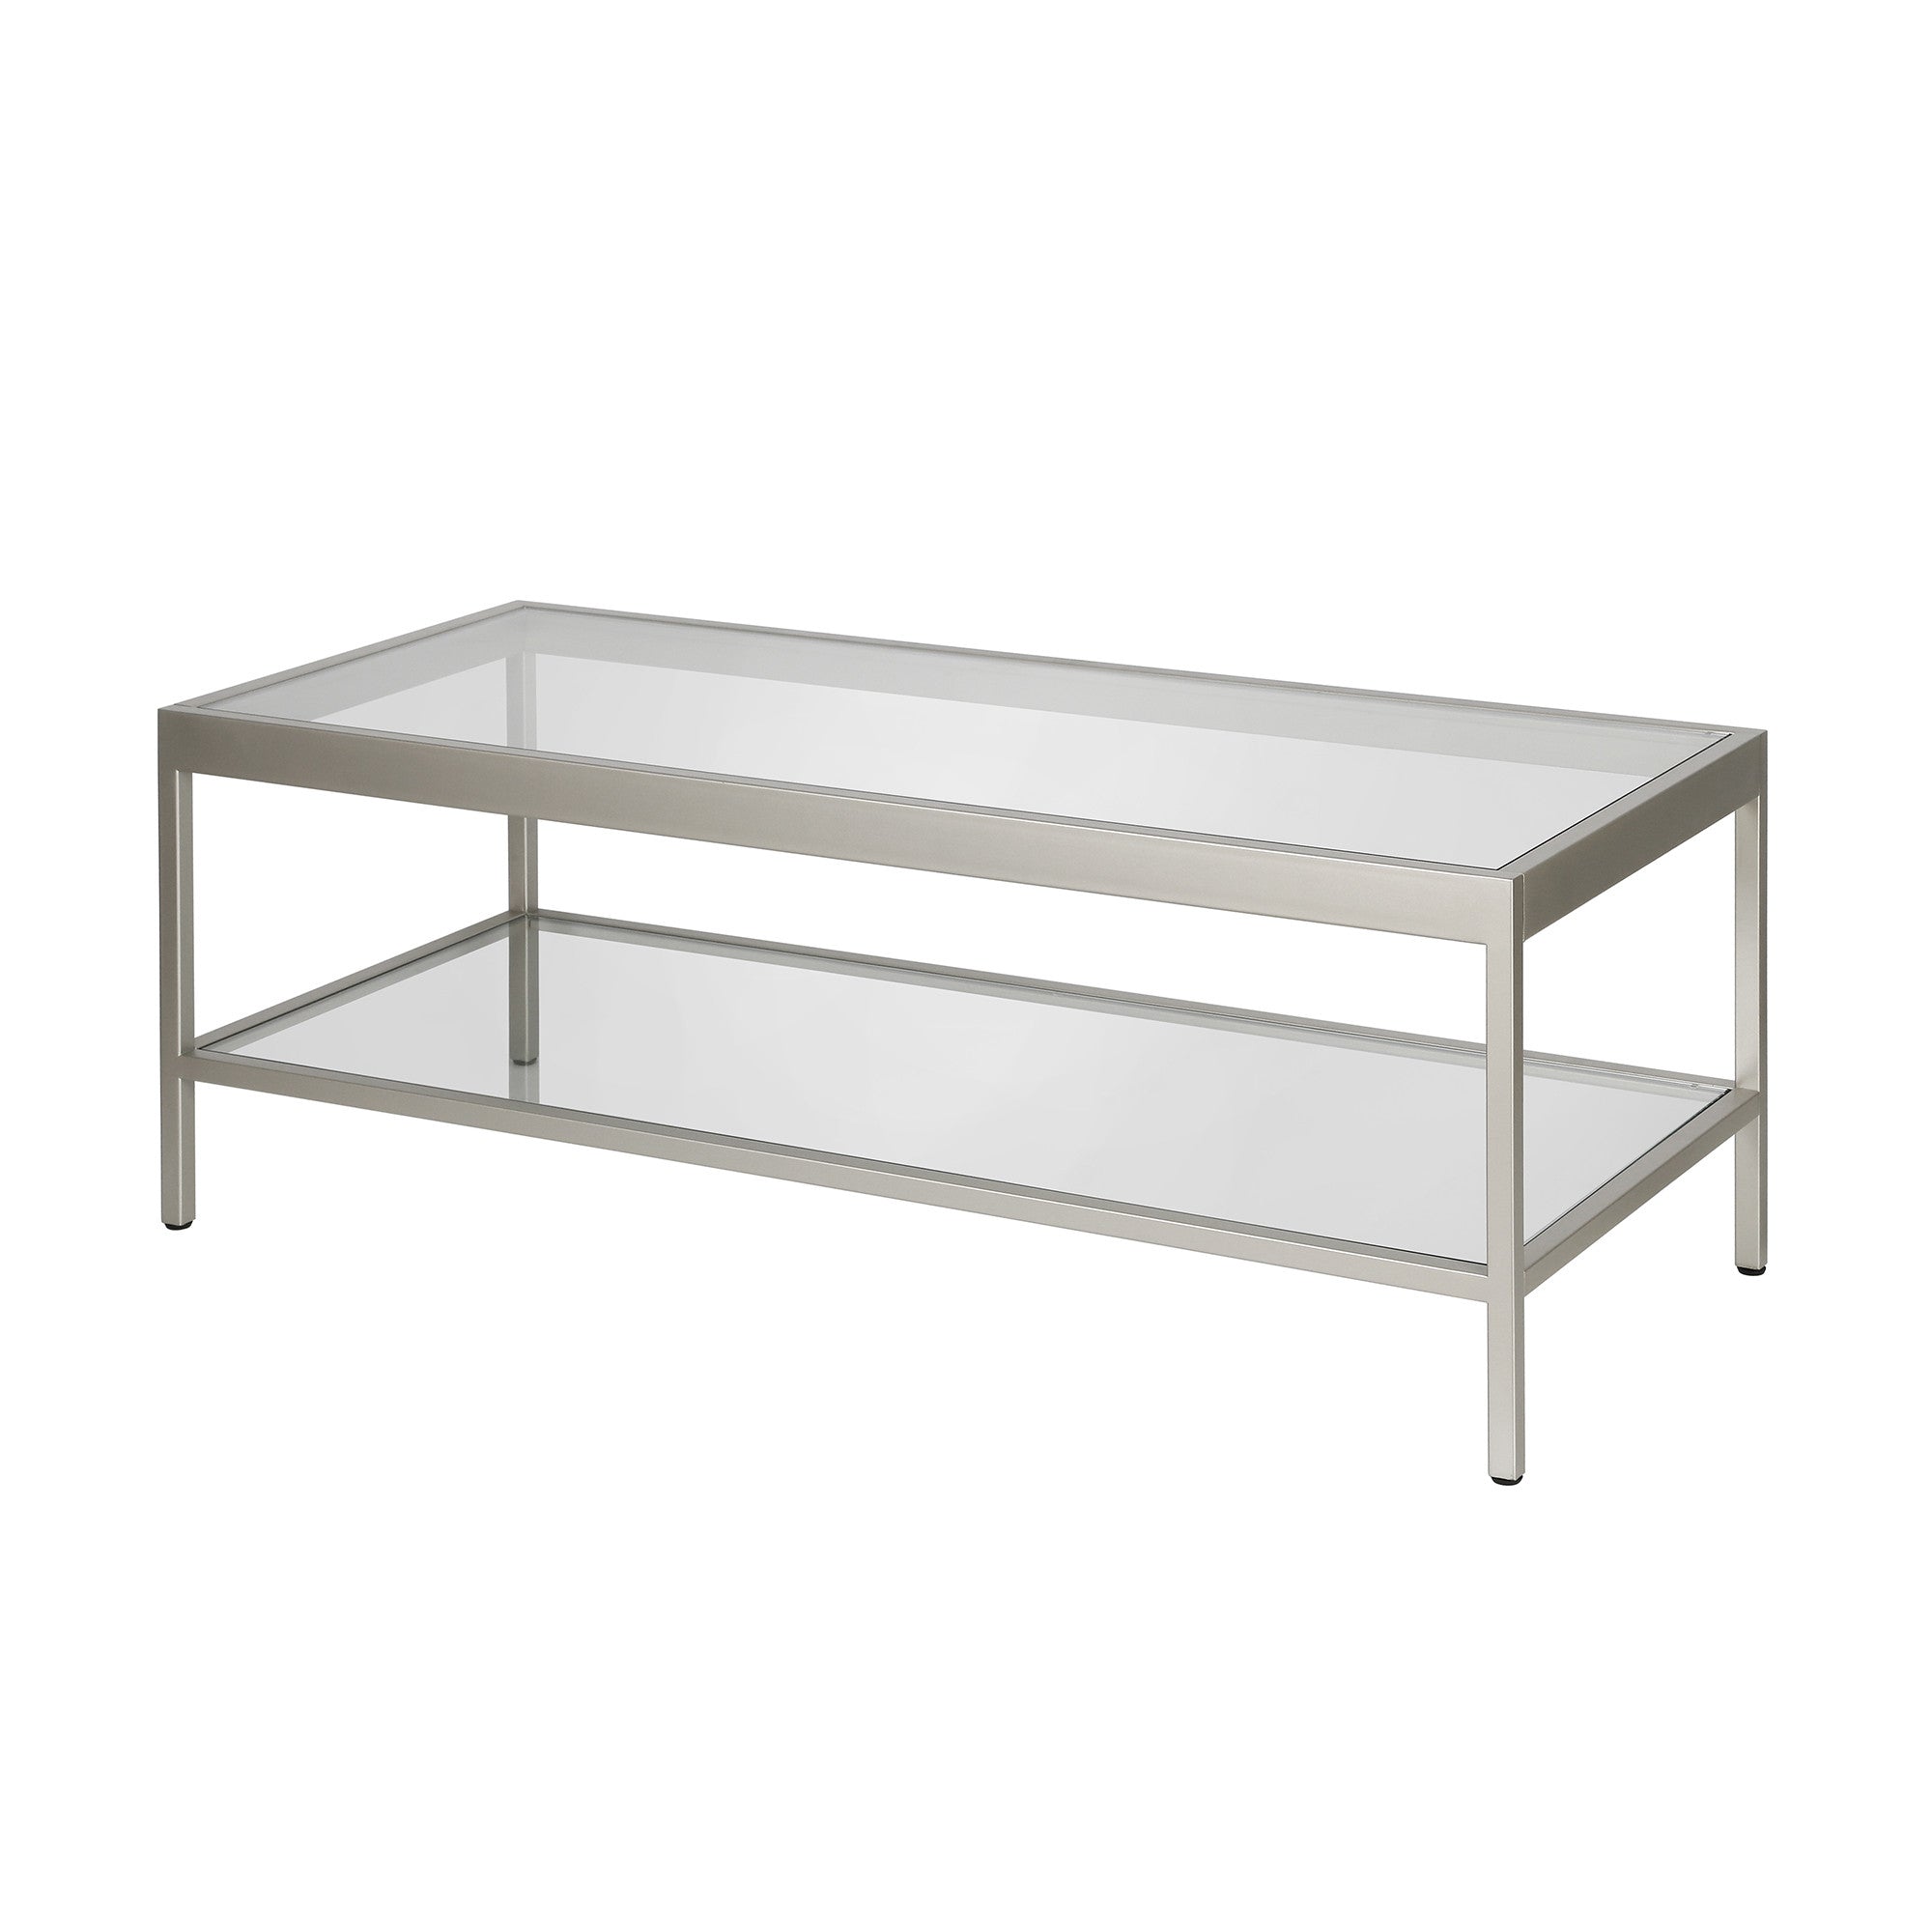 45" Silver Glass And Steel Coffee Table With Shelf